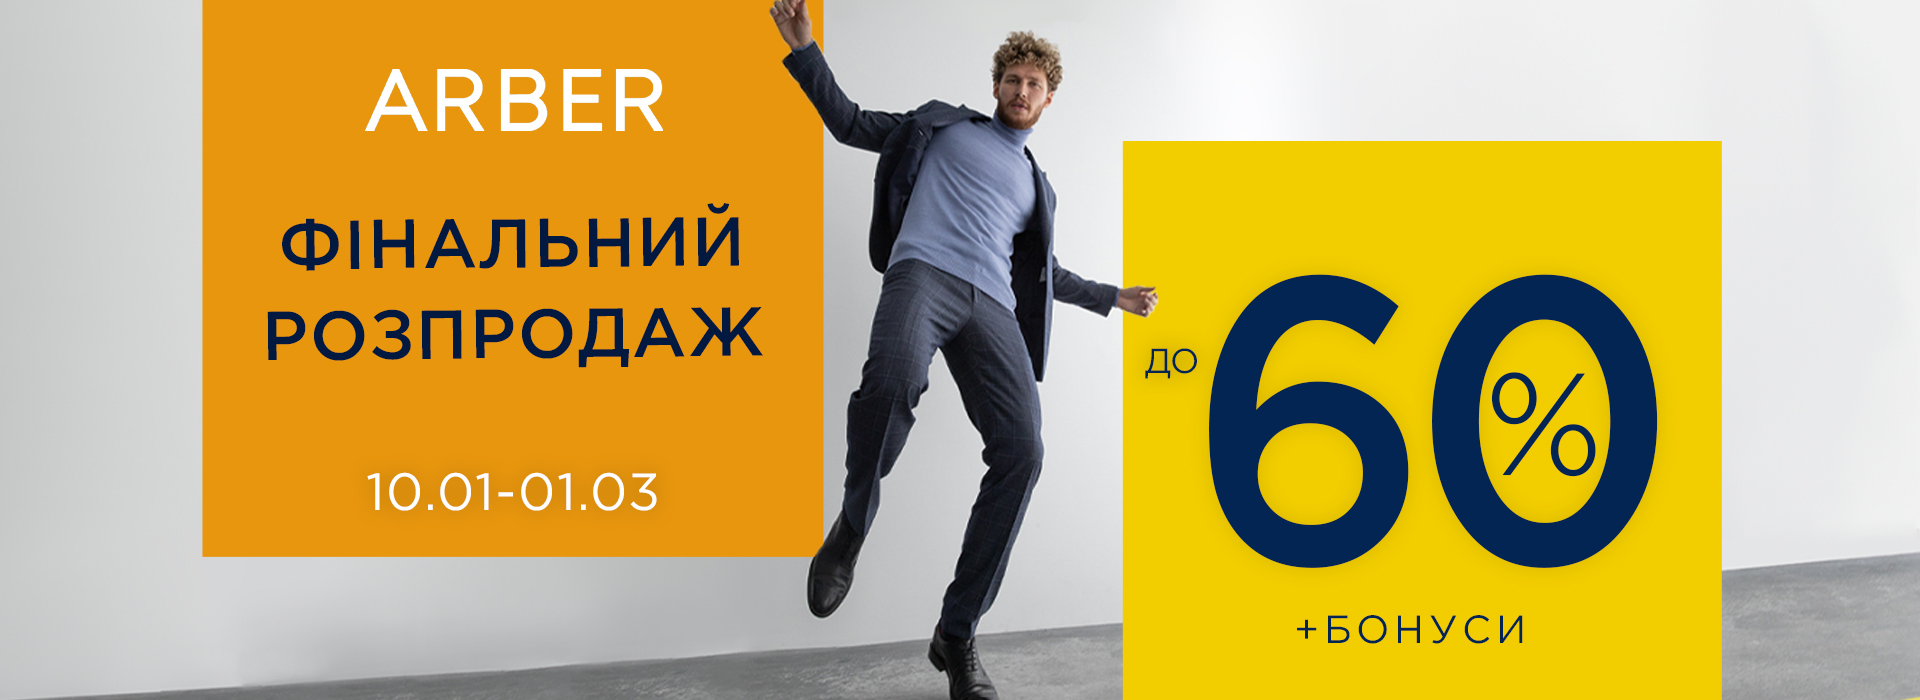 Final sale up to 60% at ARBER